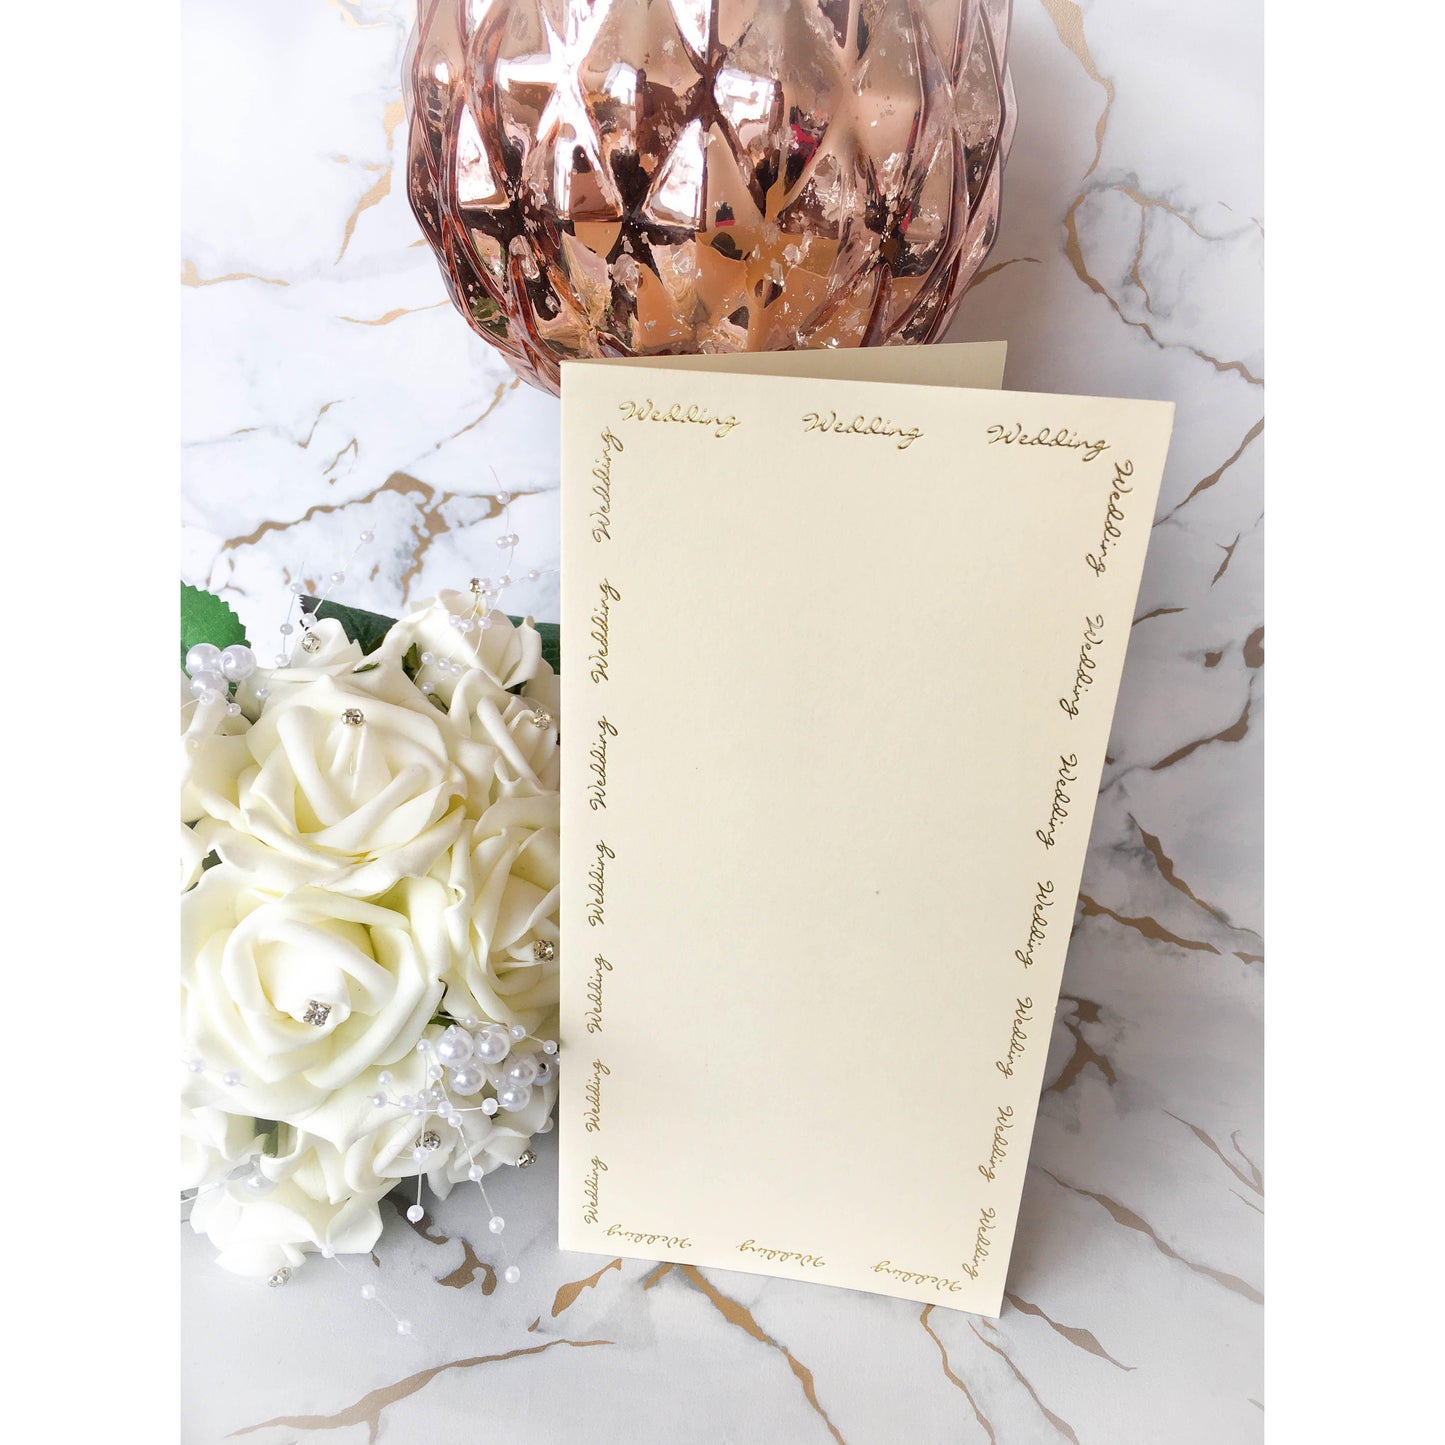 Tall DL Card Blanks Smooth Ivory With Gold Foil Wedding Script 10pk - Clearance-The Creative Bride